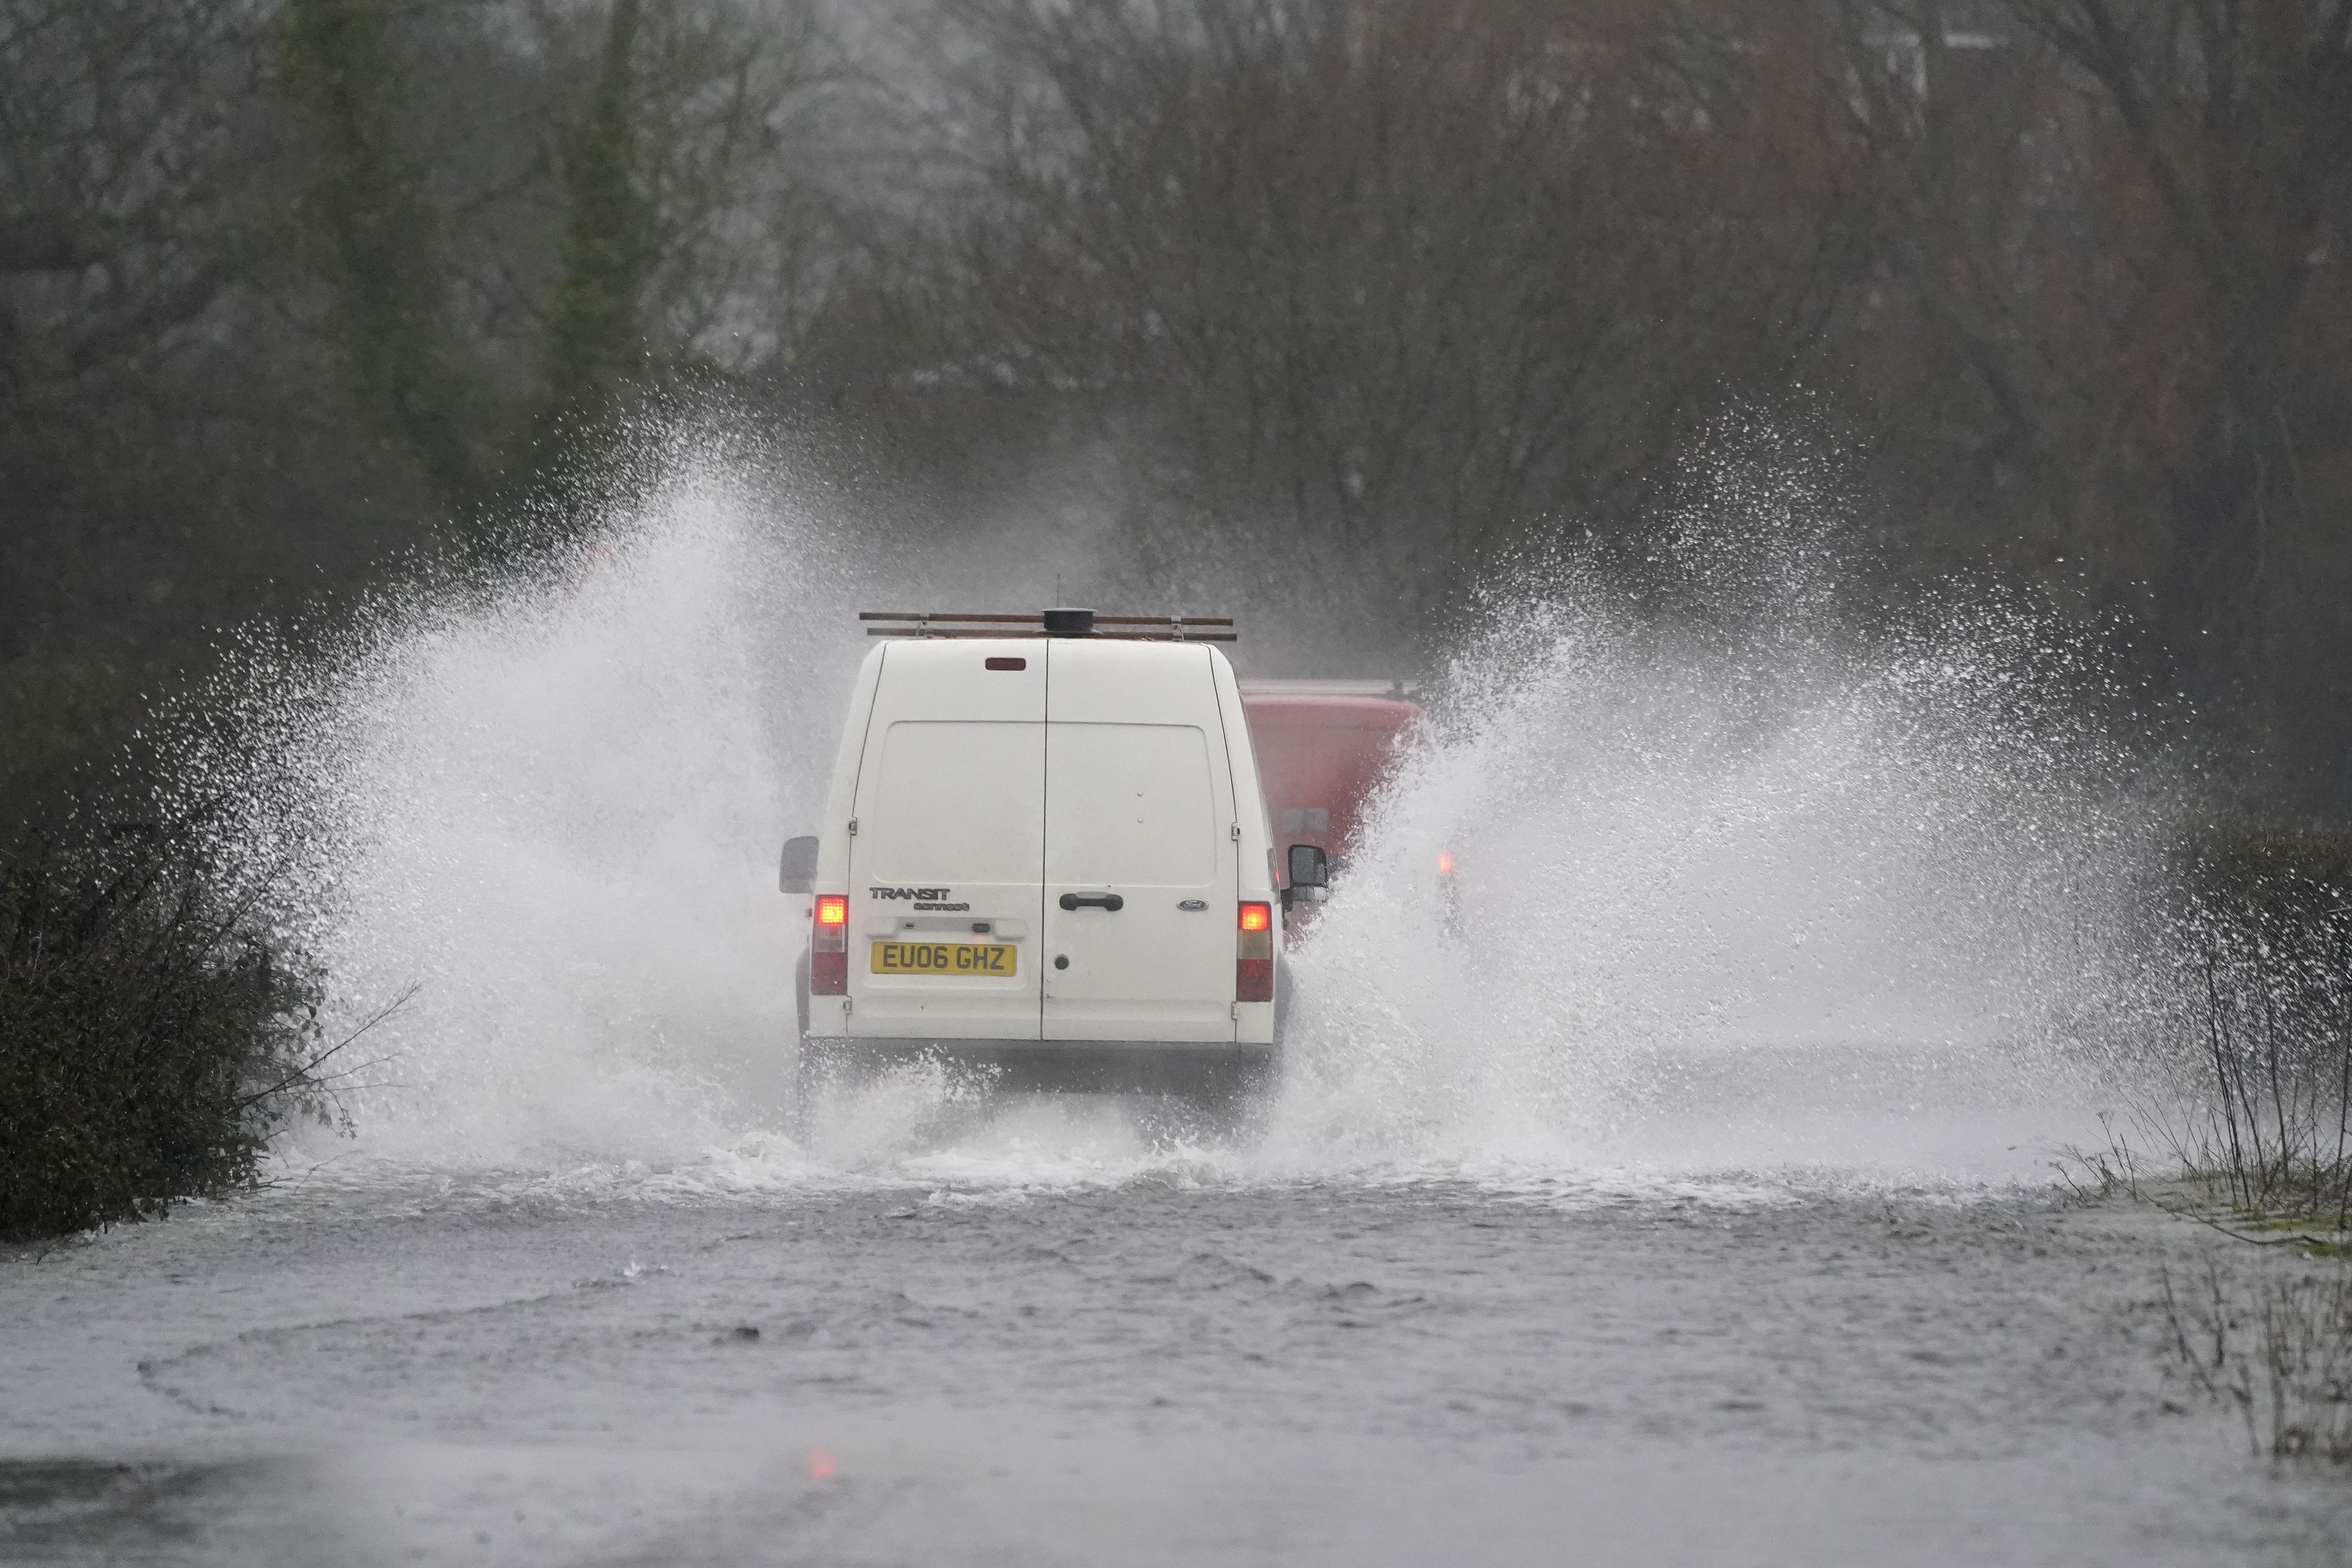 Road travel is also disrupted by surface water flooding and delays caused by heavier traffic